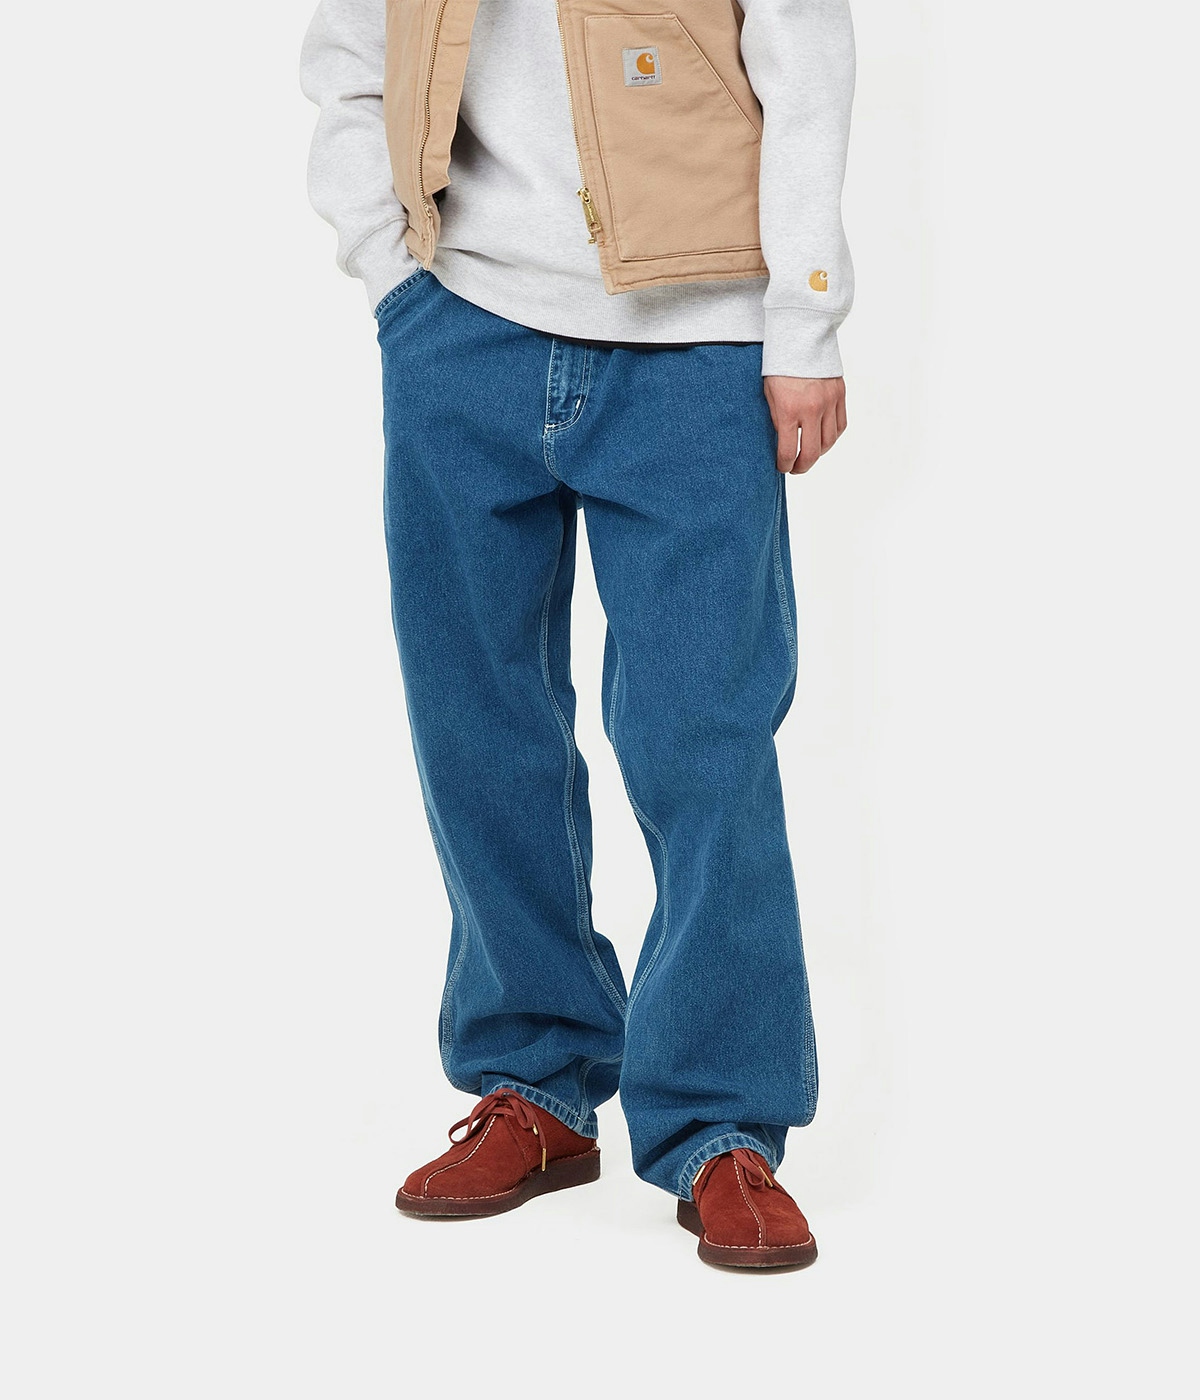 Carhartt Pant Simple Blue/Stone washed 1